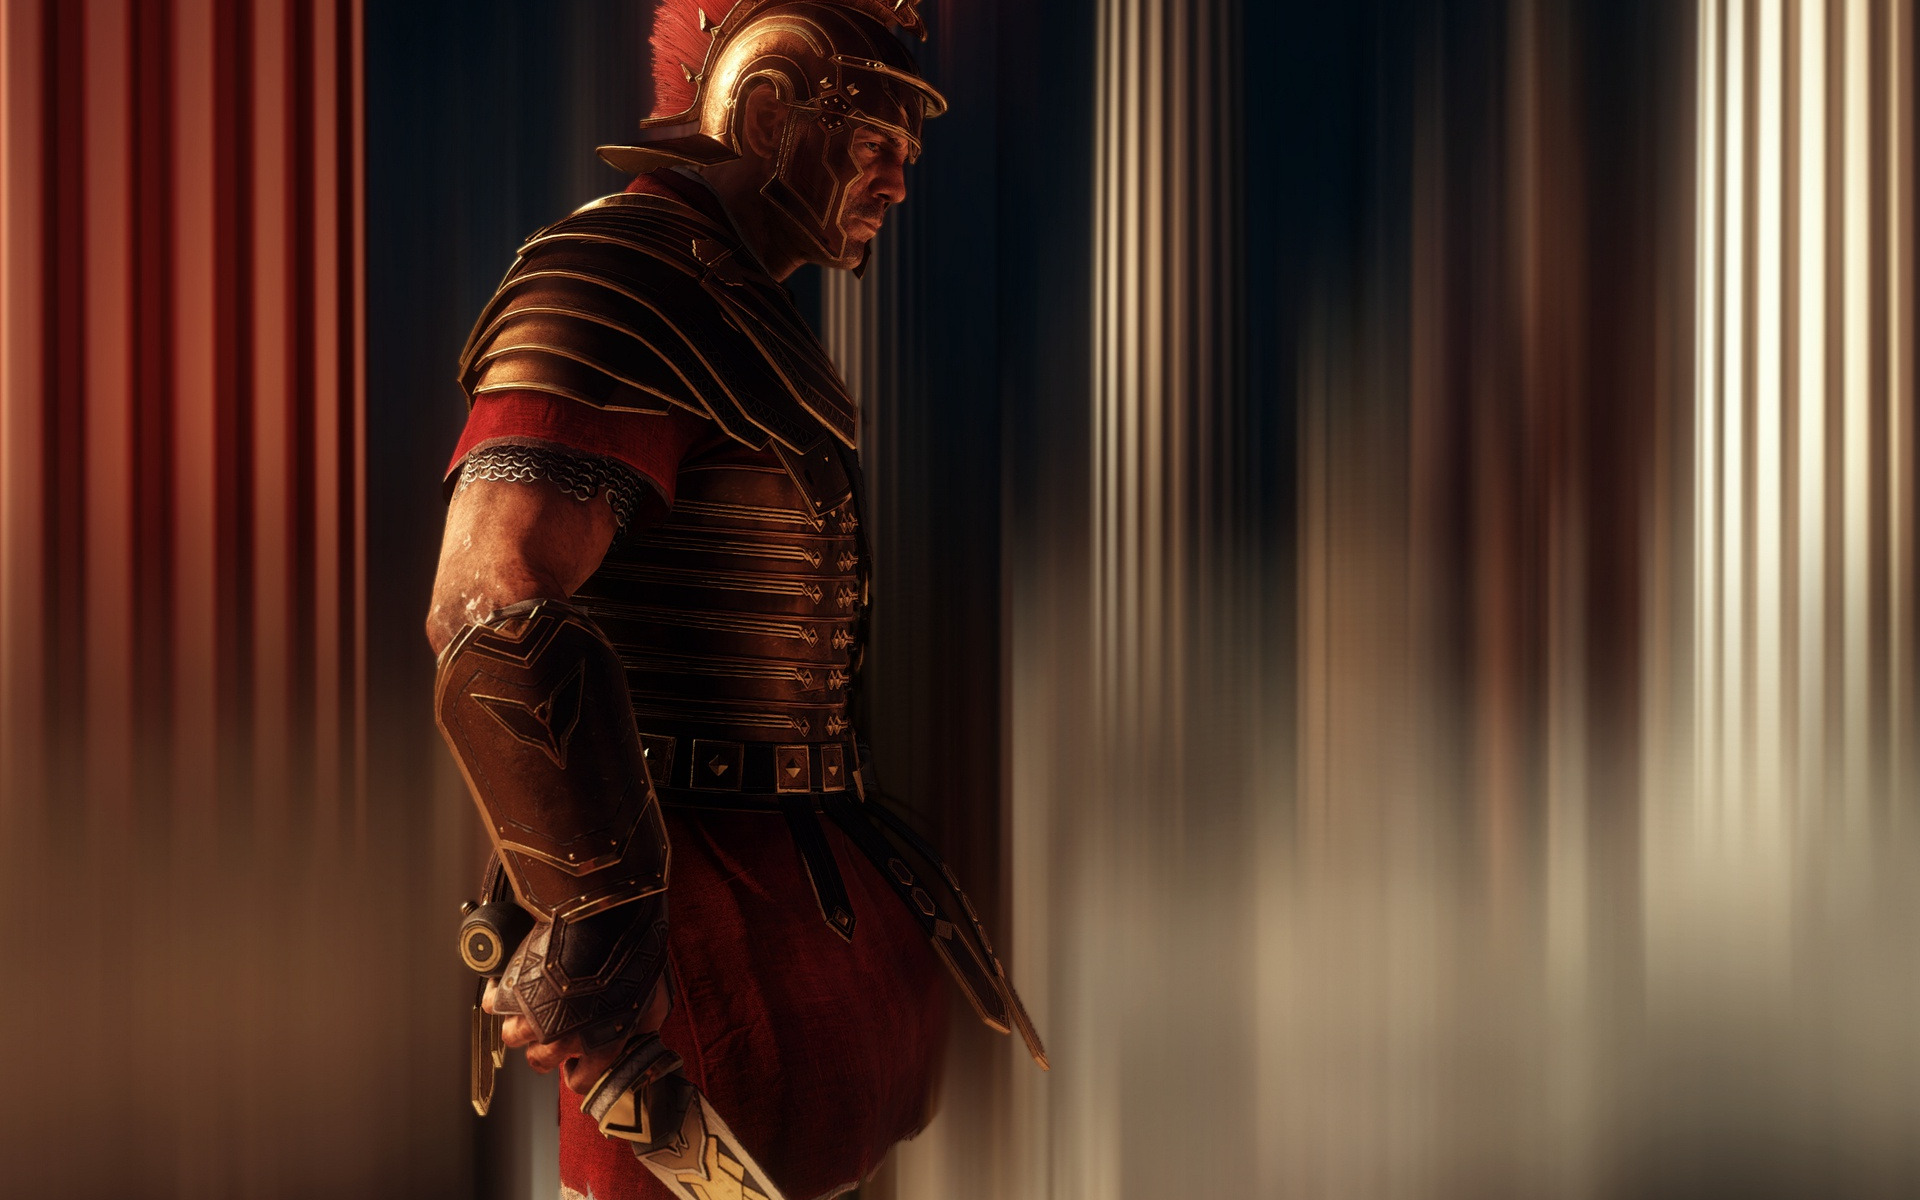 GoodFon.com - Free Wallpapers, download. warrior, Rome, Son of Rome, Ryse. 